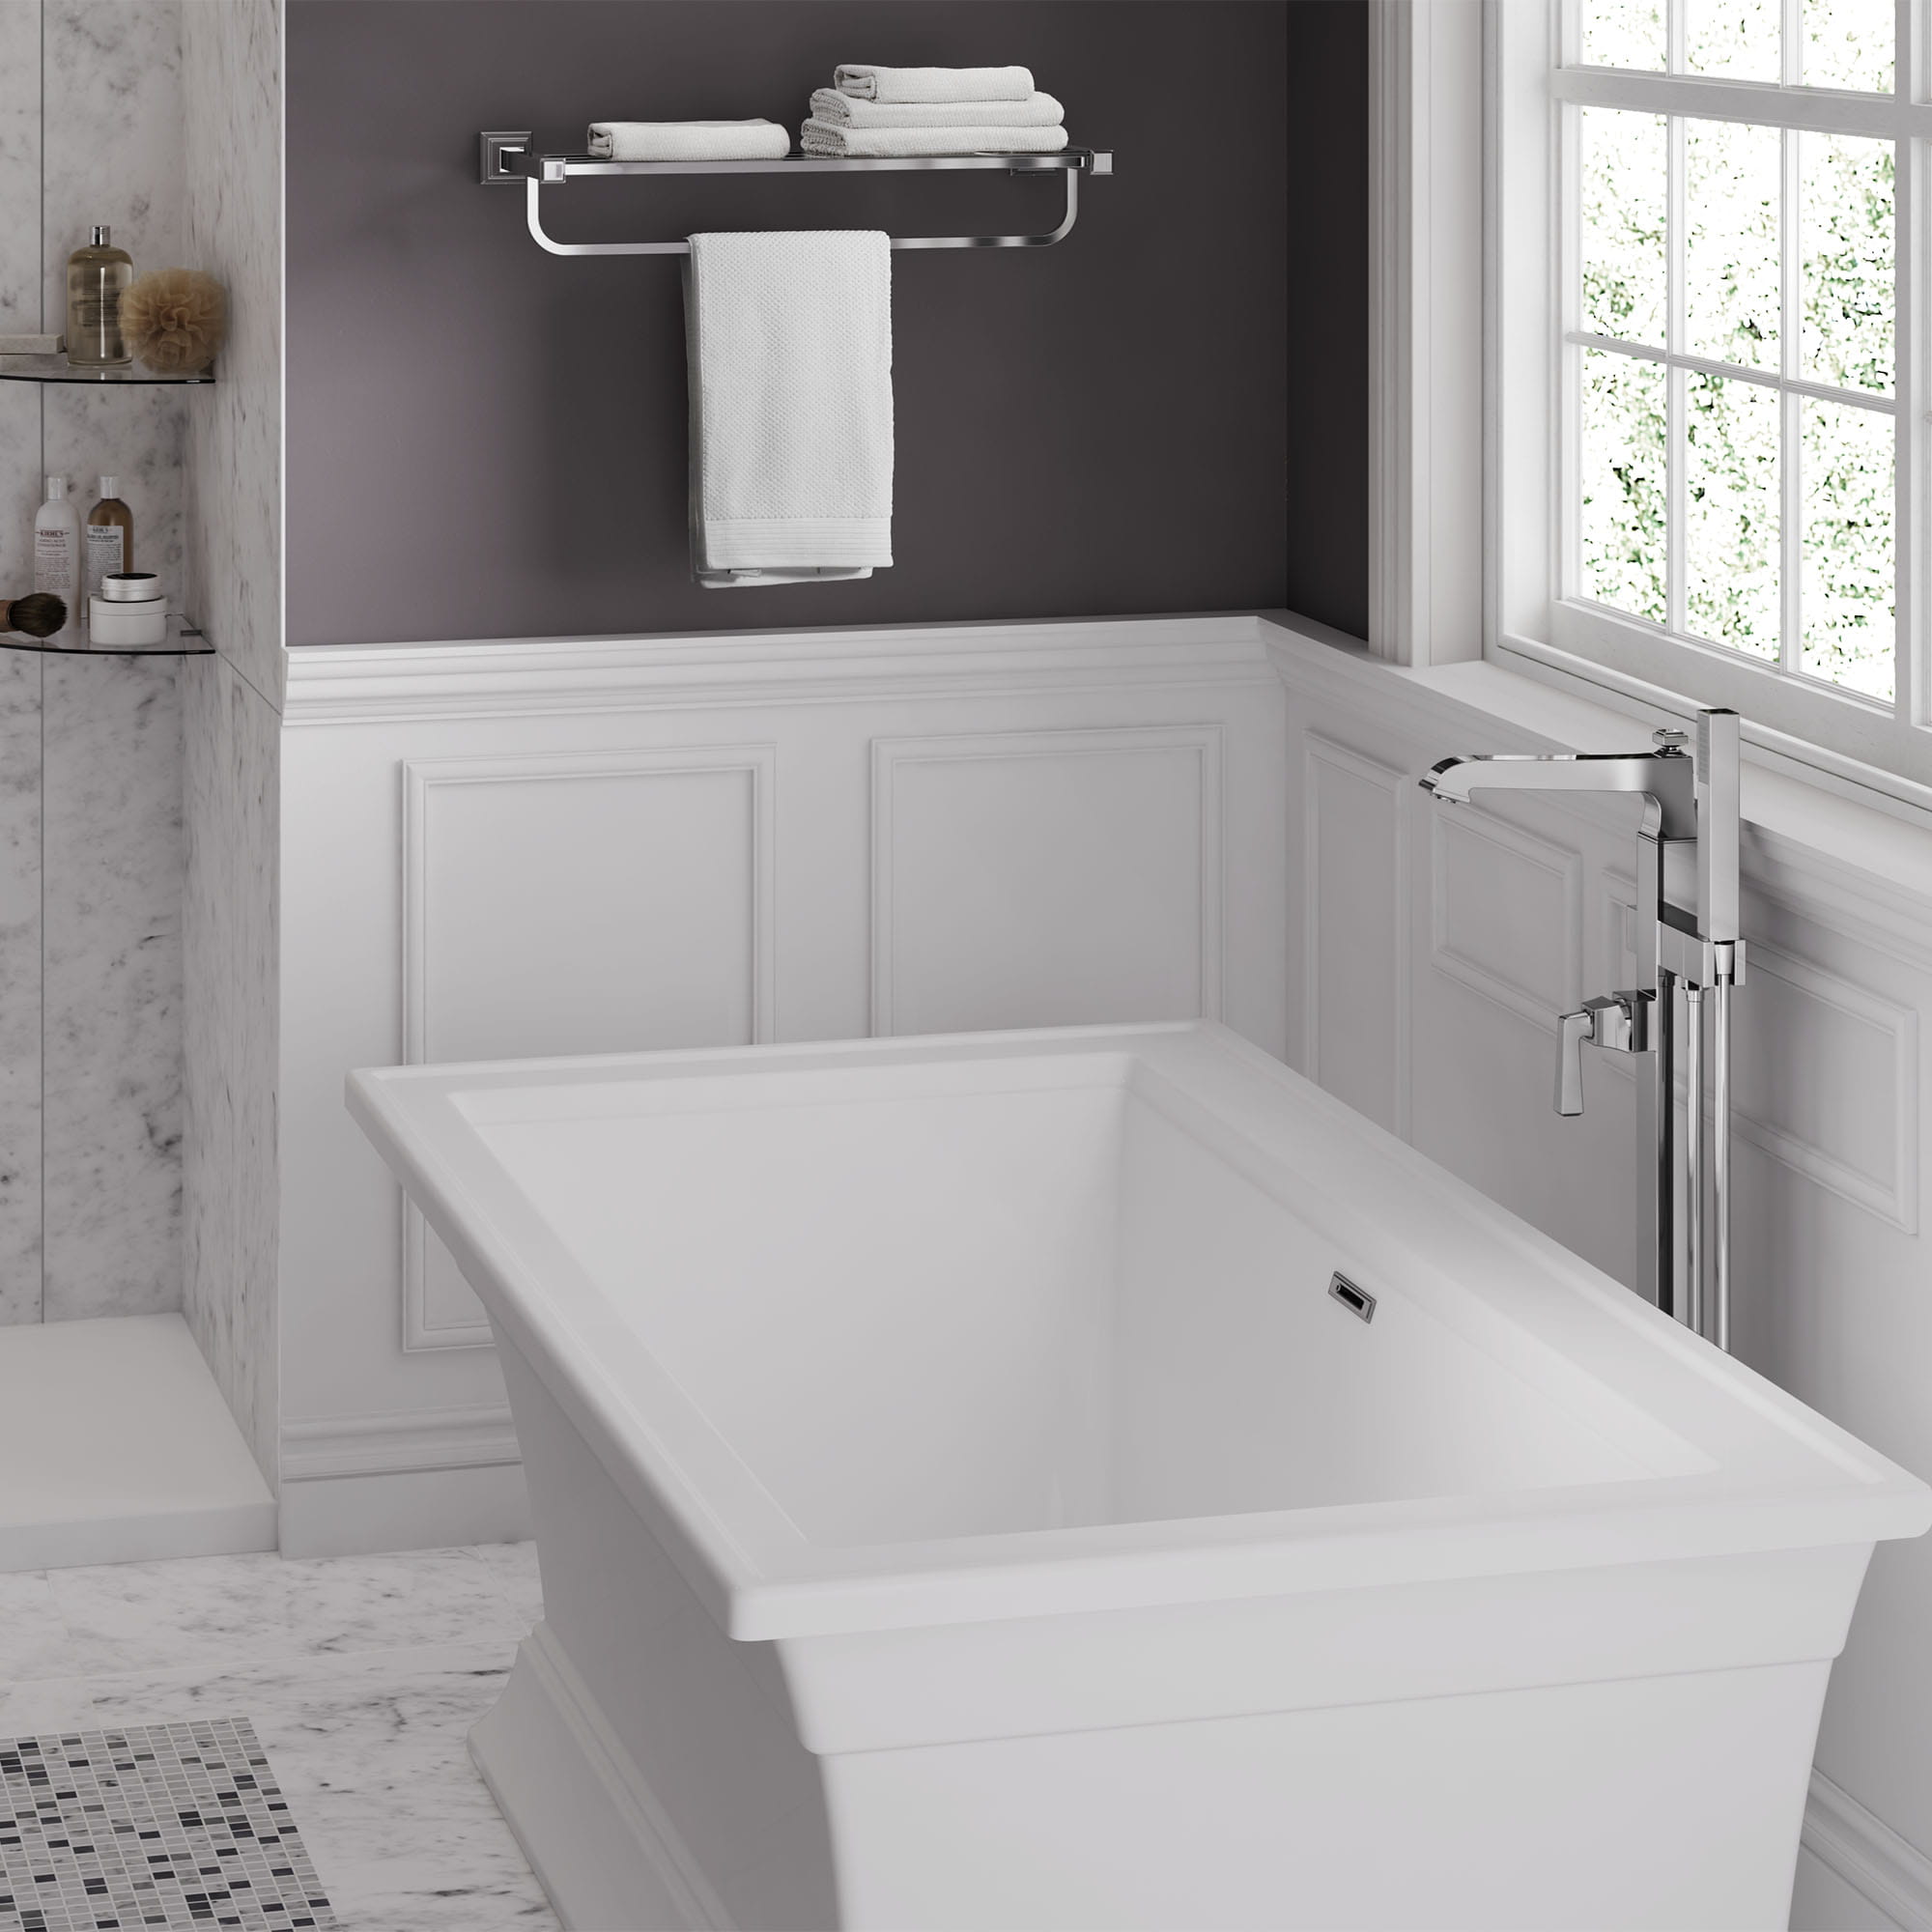 Town Square S 68 x 36 Inch Freestanding Bathtub Center Drain With Integrated Overflow WHITE